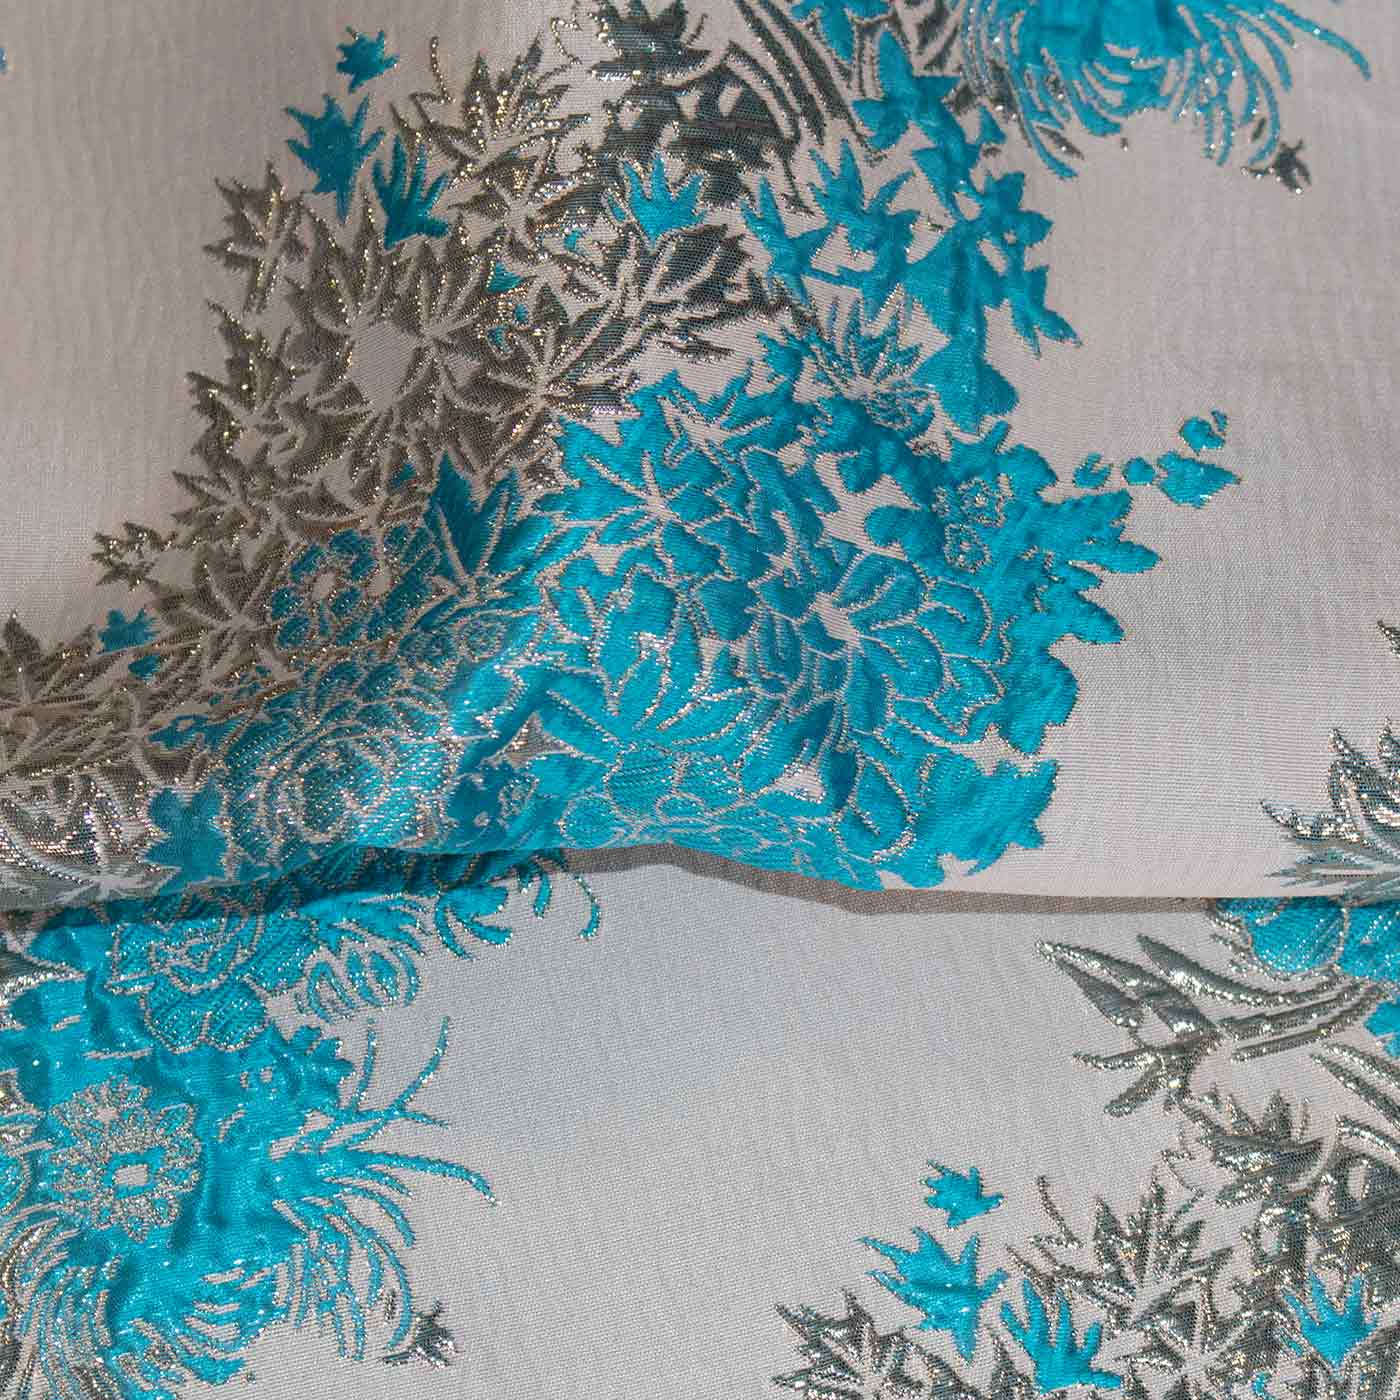 Sky Blue and Gold Floral Brocade Fabric